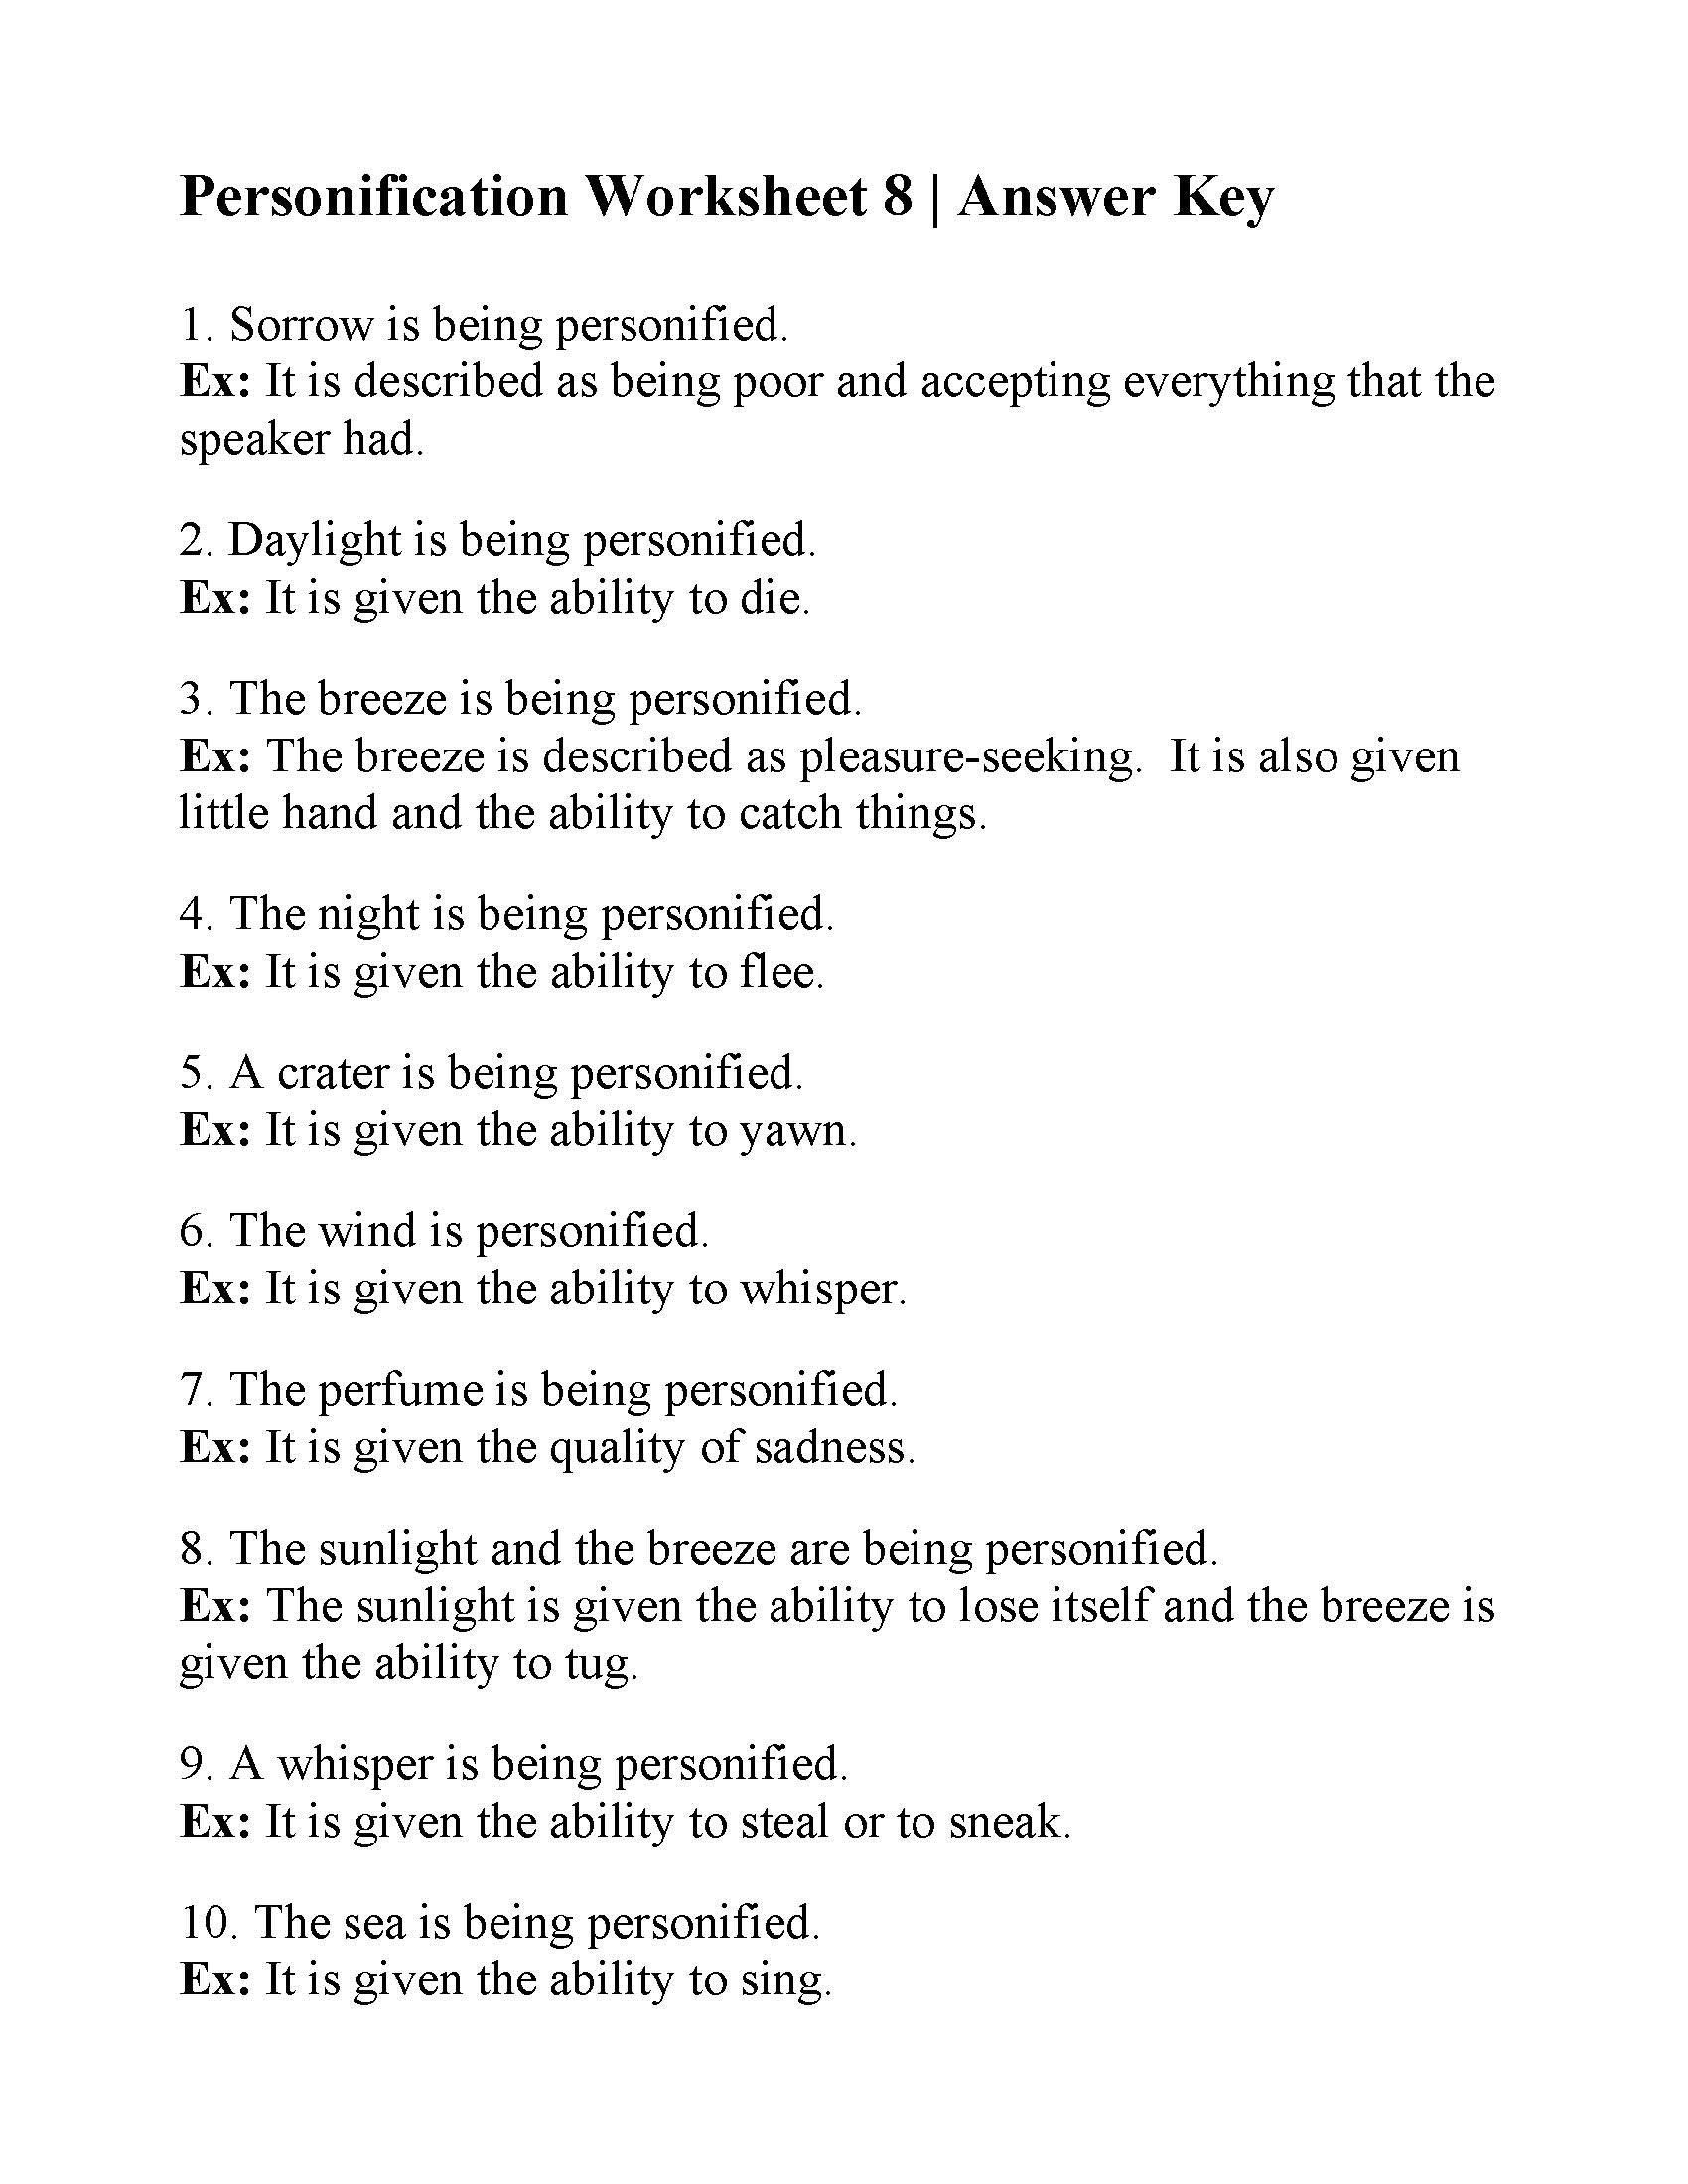 Personification Worksheets Answers Personification Worksheet 8